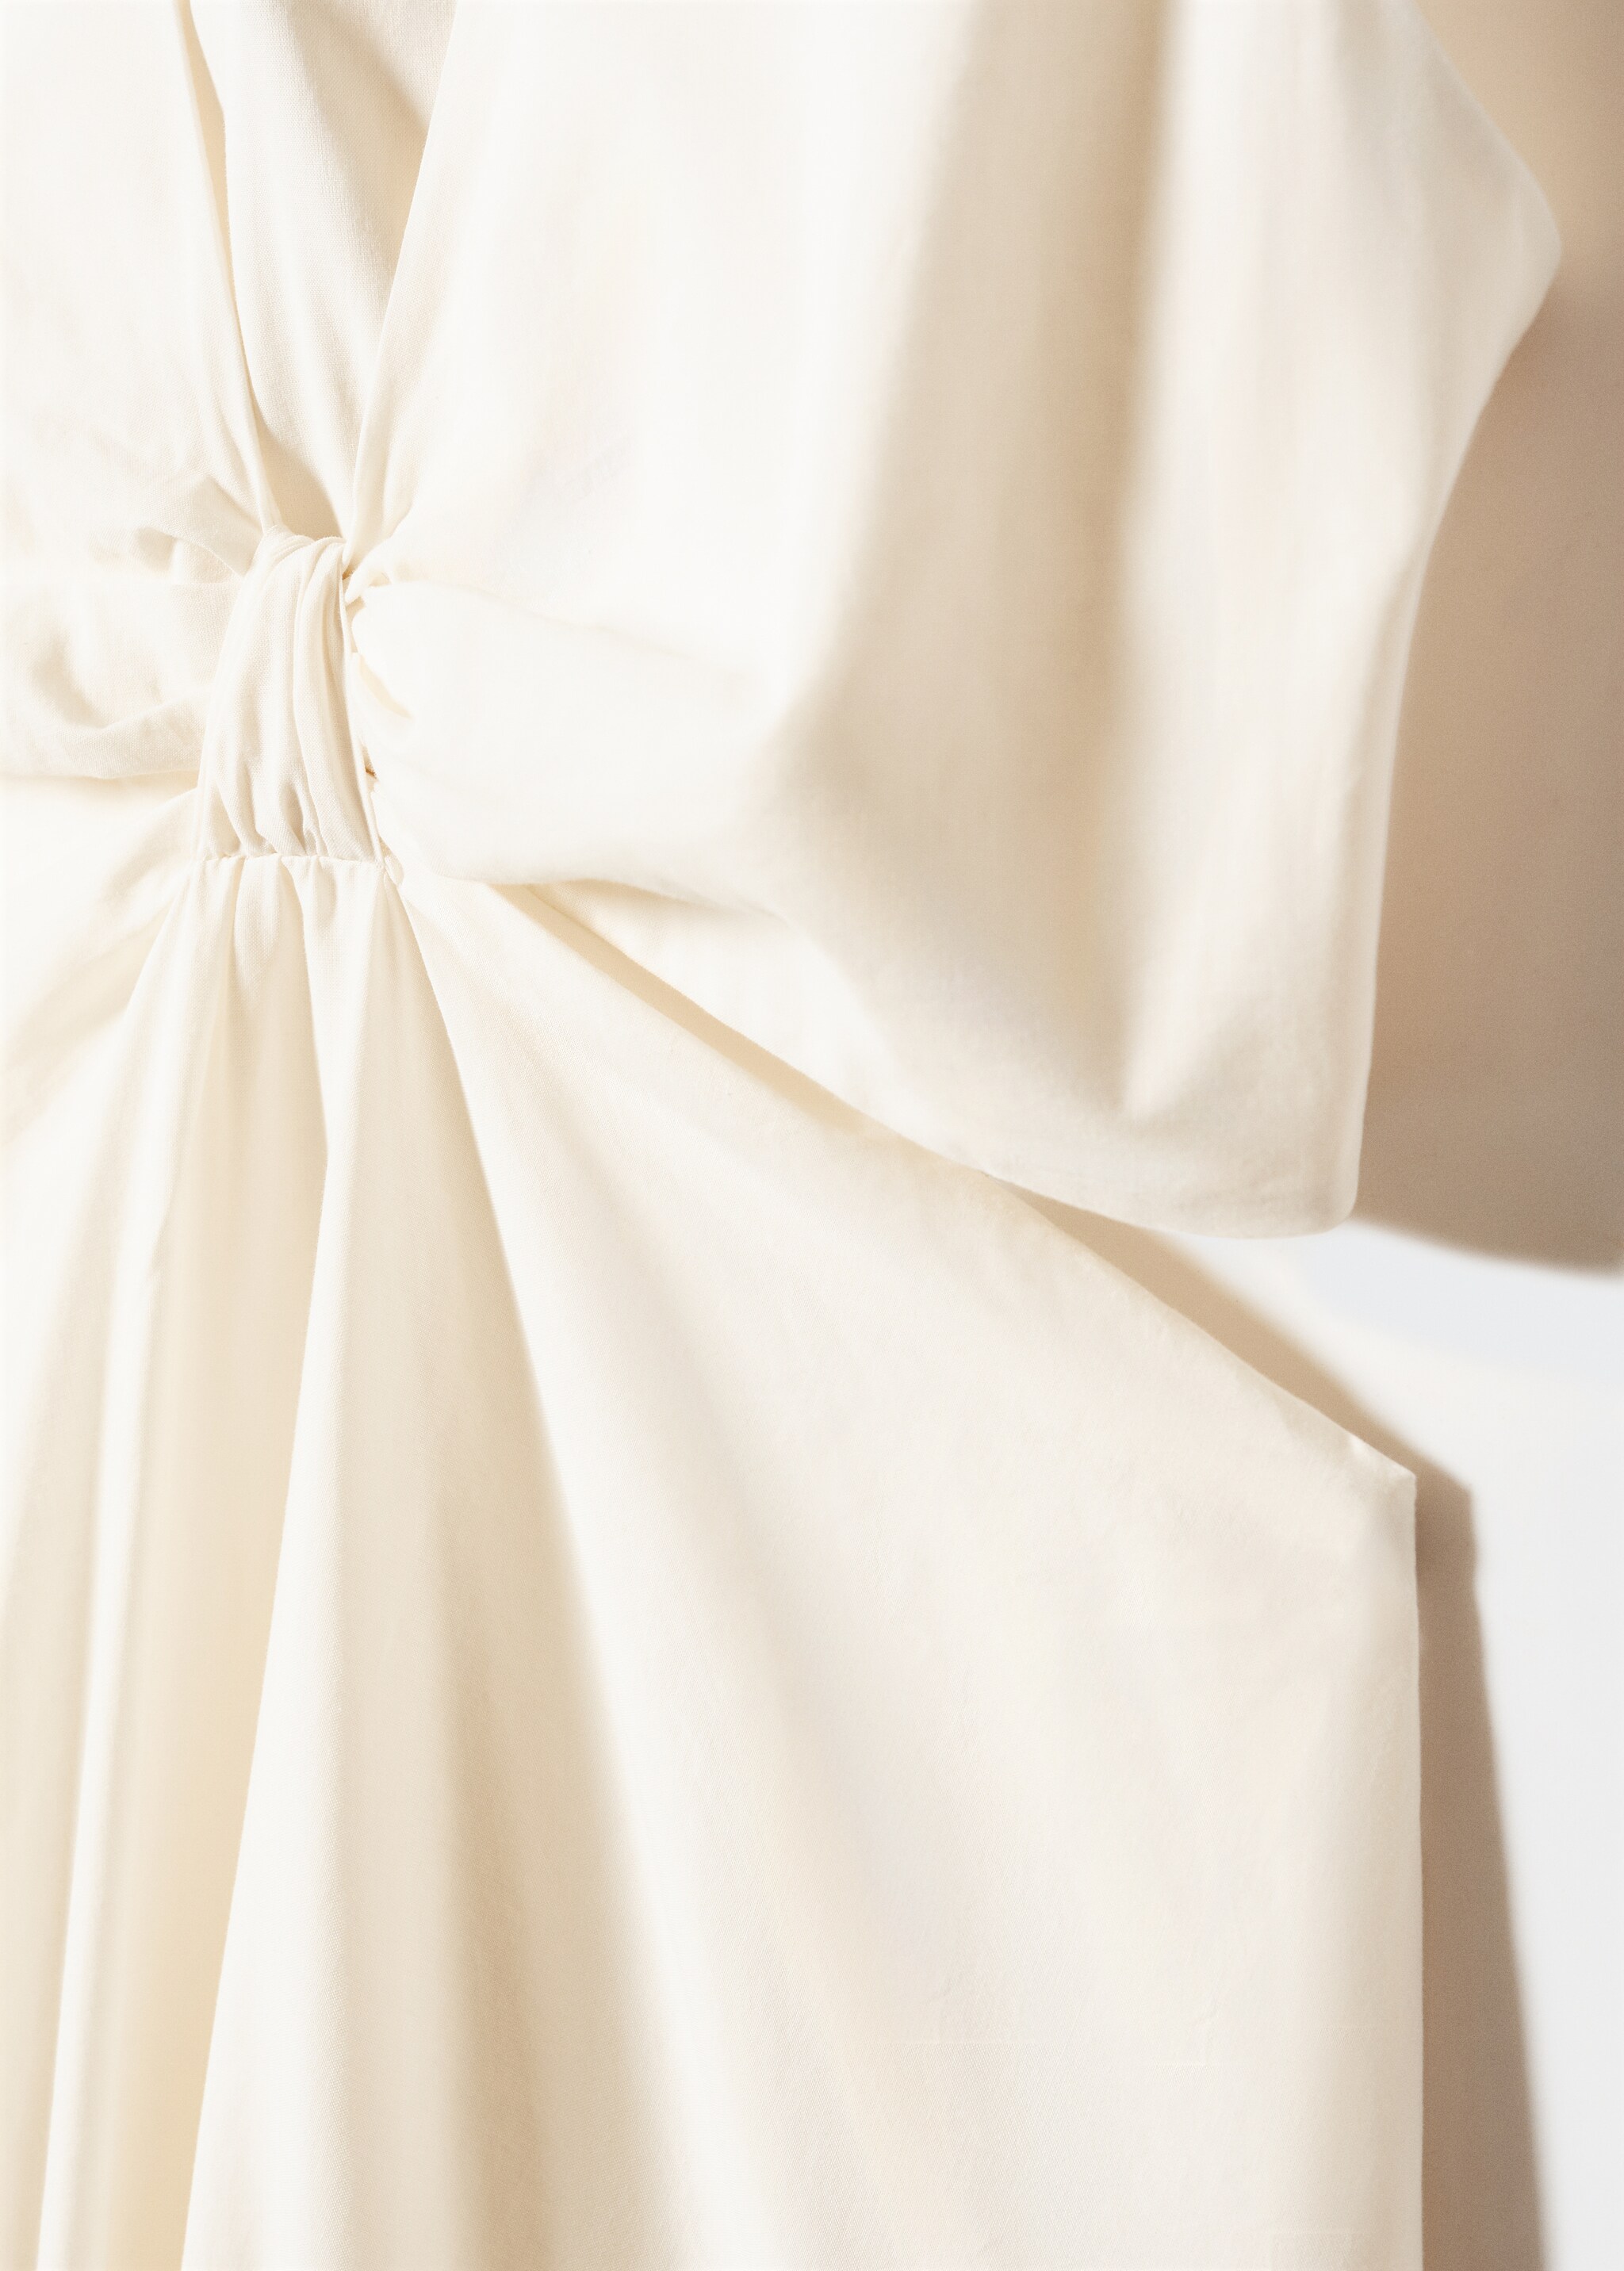 Knot dress with openings - Details of the article 8